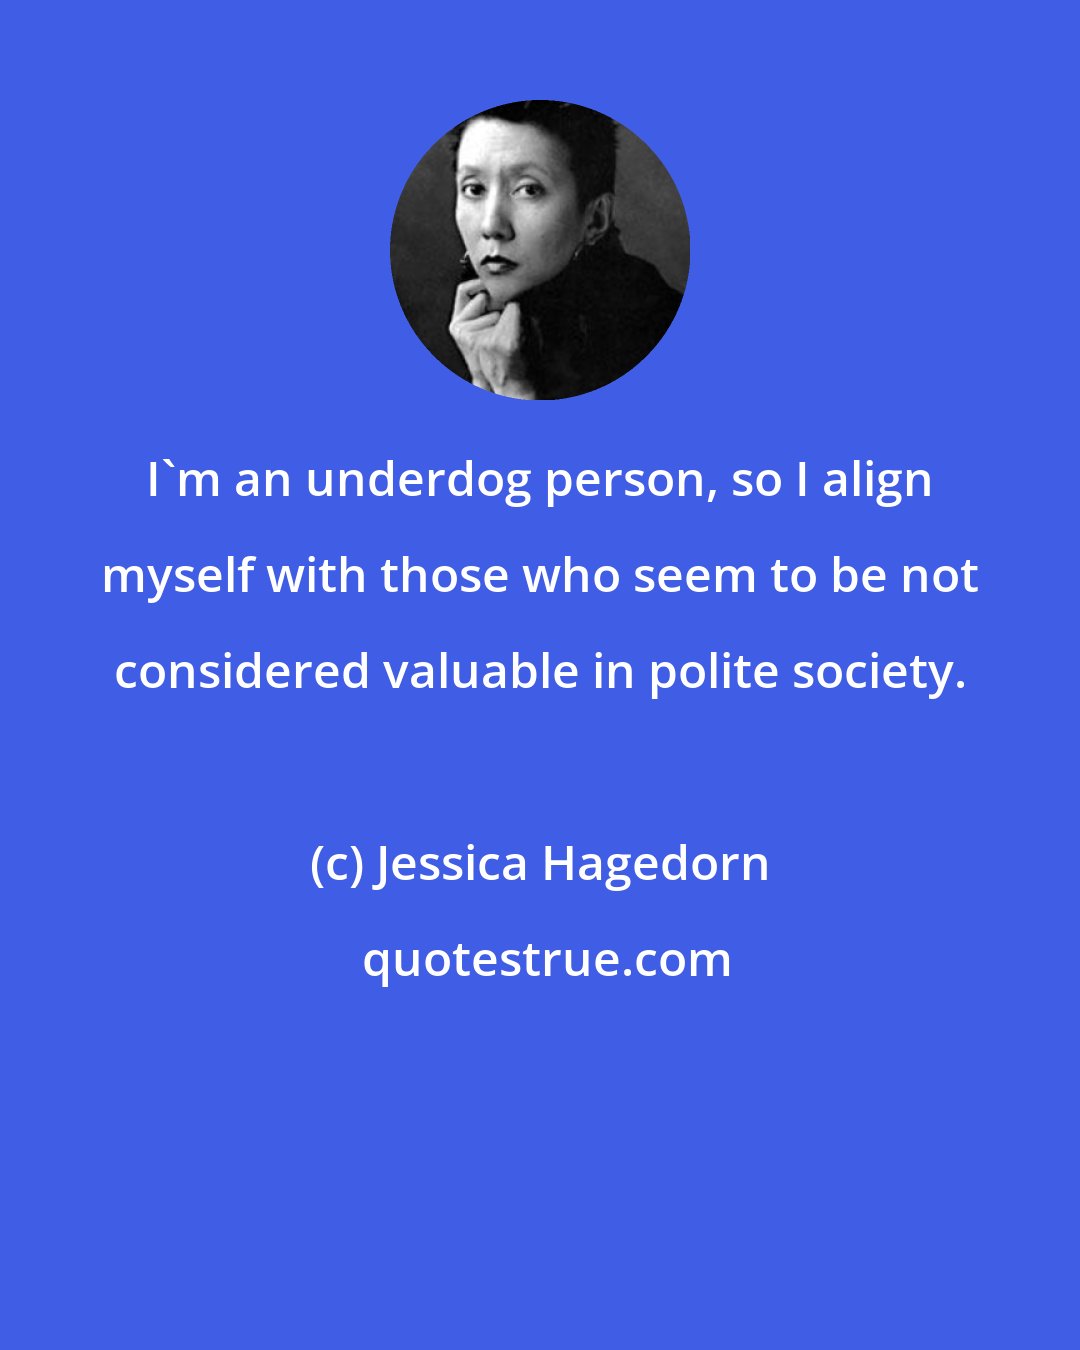 Jessica Hagedorn: I'm an underdog person, so I align myself with those who seem to be not considered valuable in polite society.